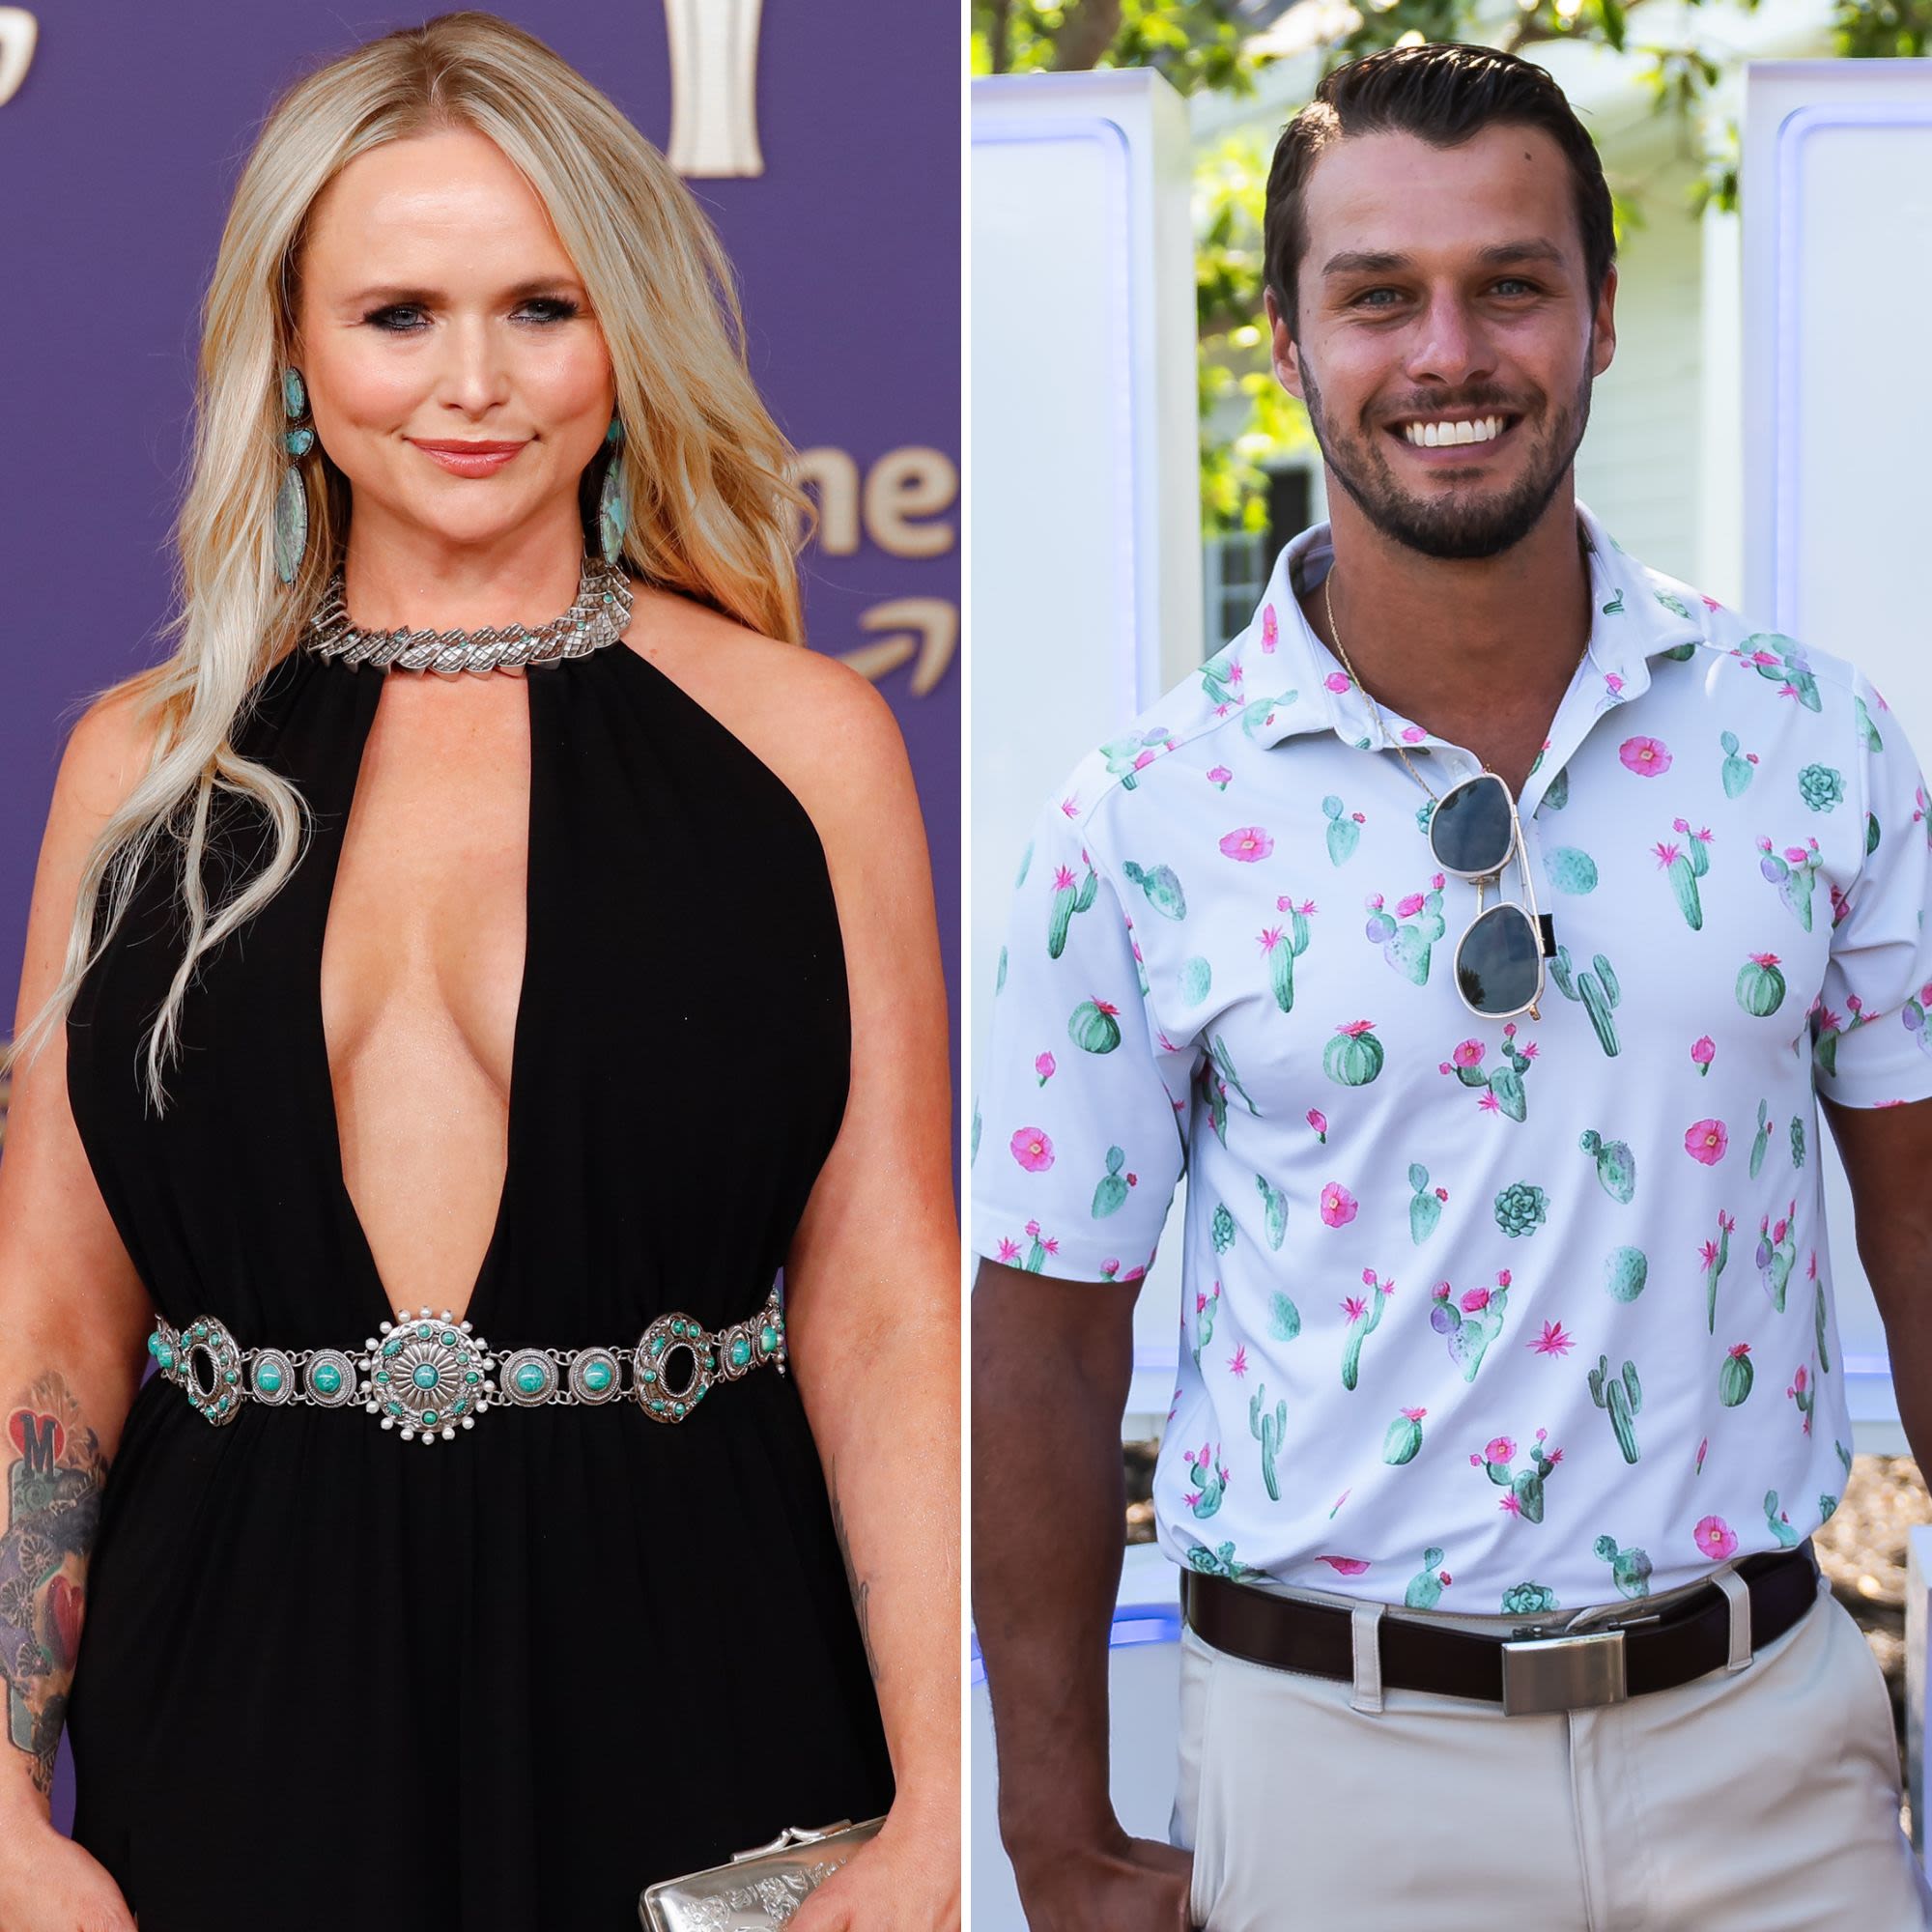 Miranda Lambert Shares Cryptic Message After Brendan McLoughlin Dance Scandal: ‘This Is Your Sign’